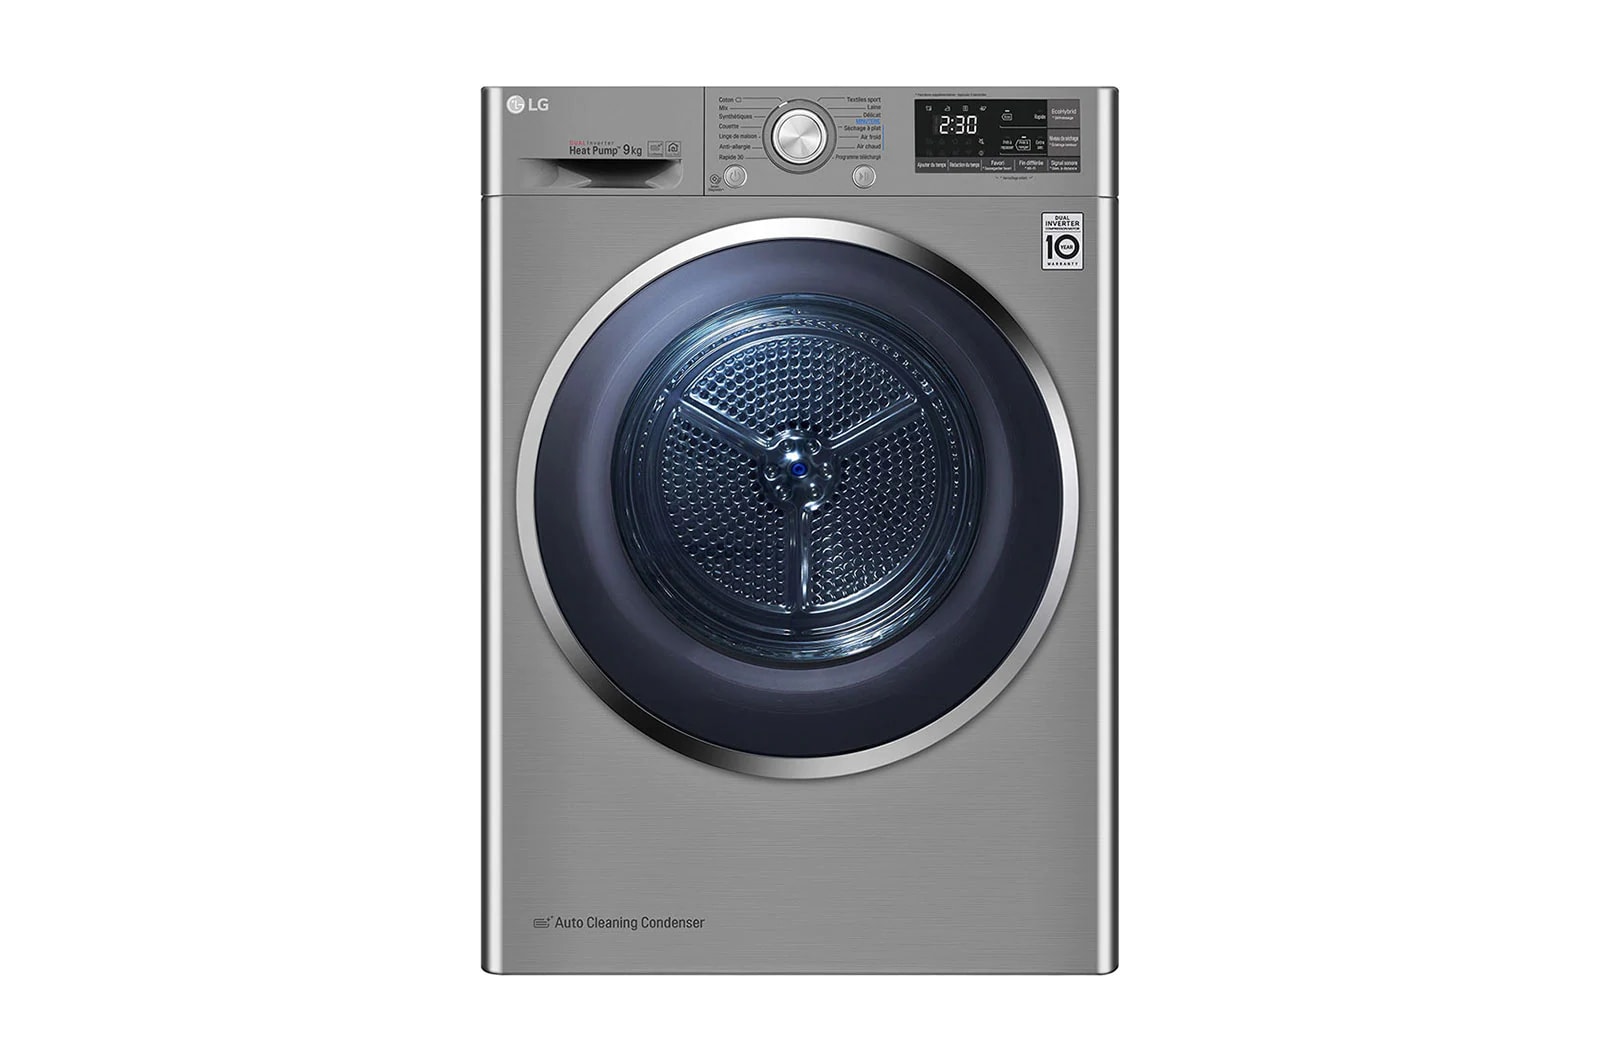 9Kg DUAL Inverter Dryer, sensor dry, Allergy care, Drum care, Silver color, ThinQ (Wi-Fi)